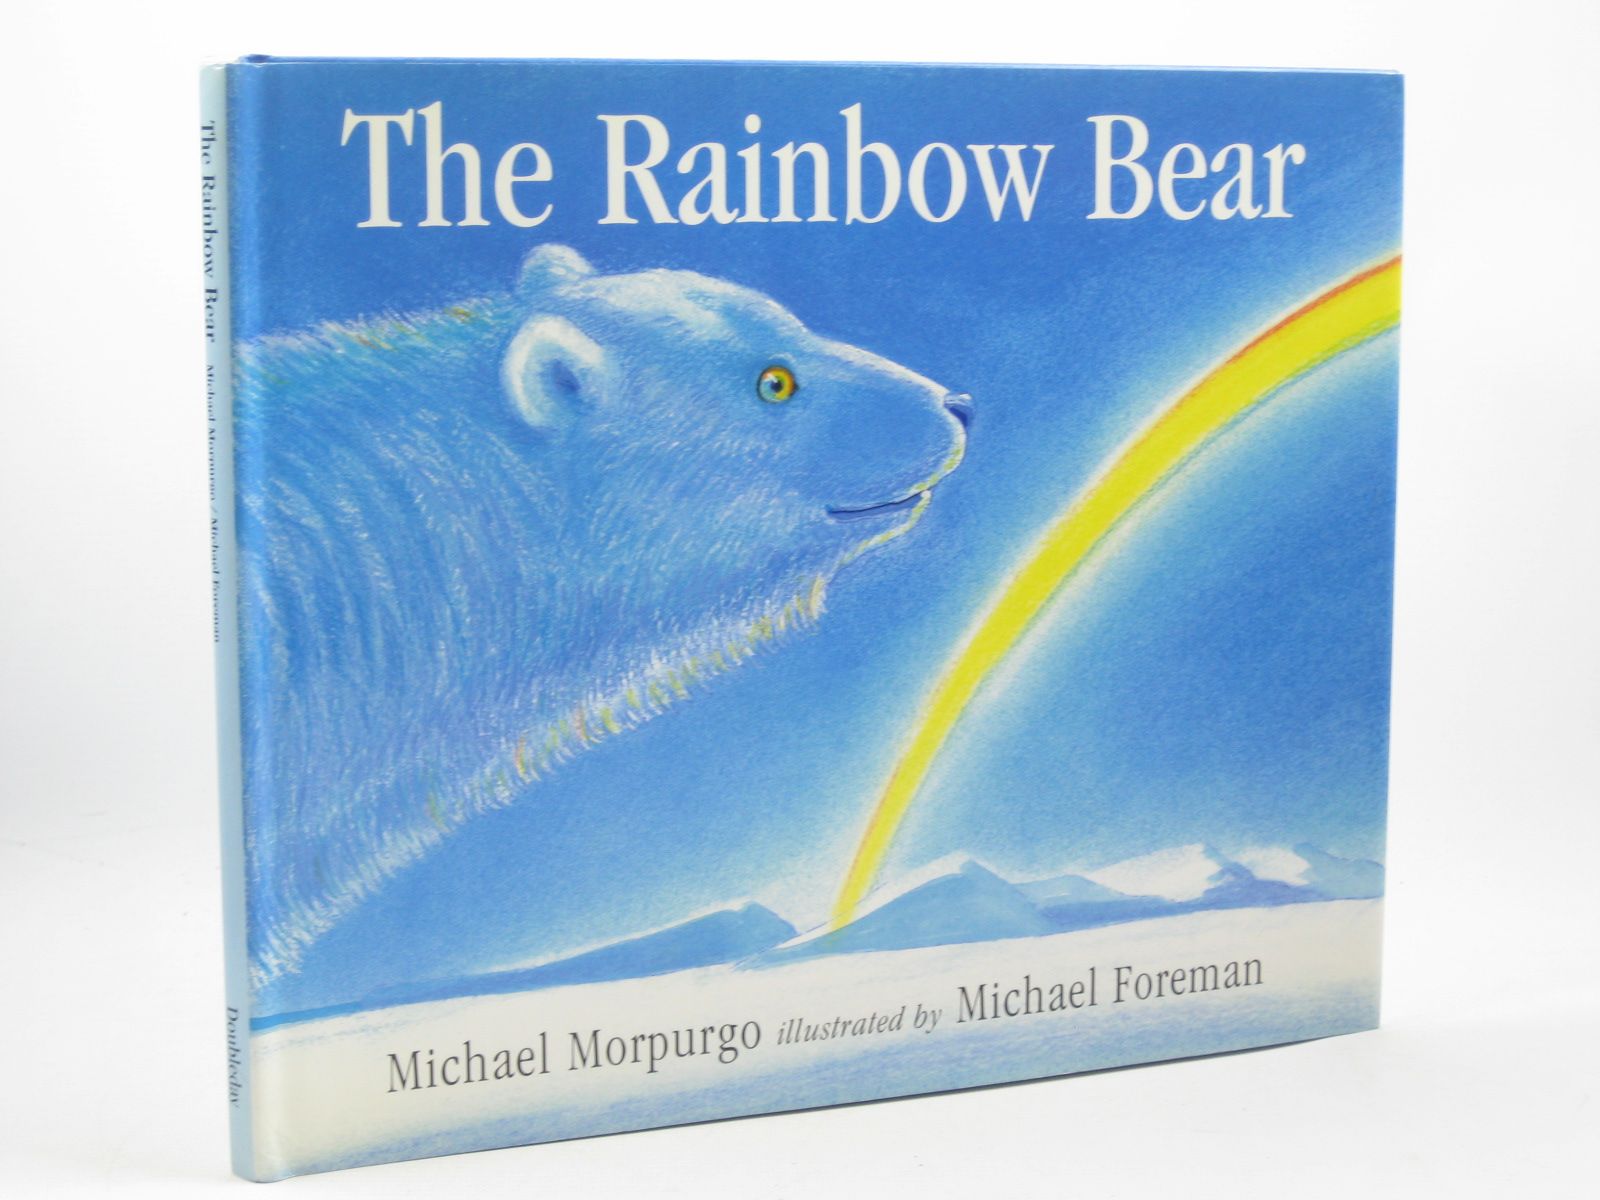 Photo of THE RAINBOW BEAR written by Morpurgo, Michael illustrated by Foreman, Michael published by Doubleday (STOCK CODE: 1312500)  for sale by Stella & Rose's Books